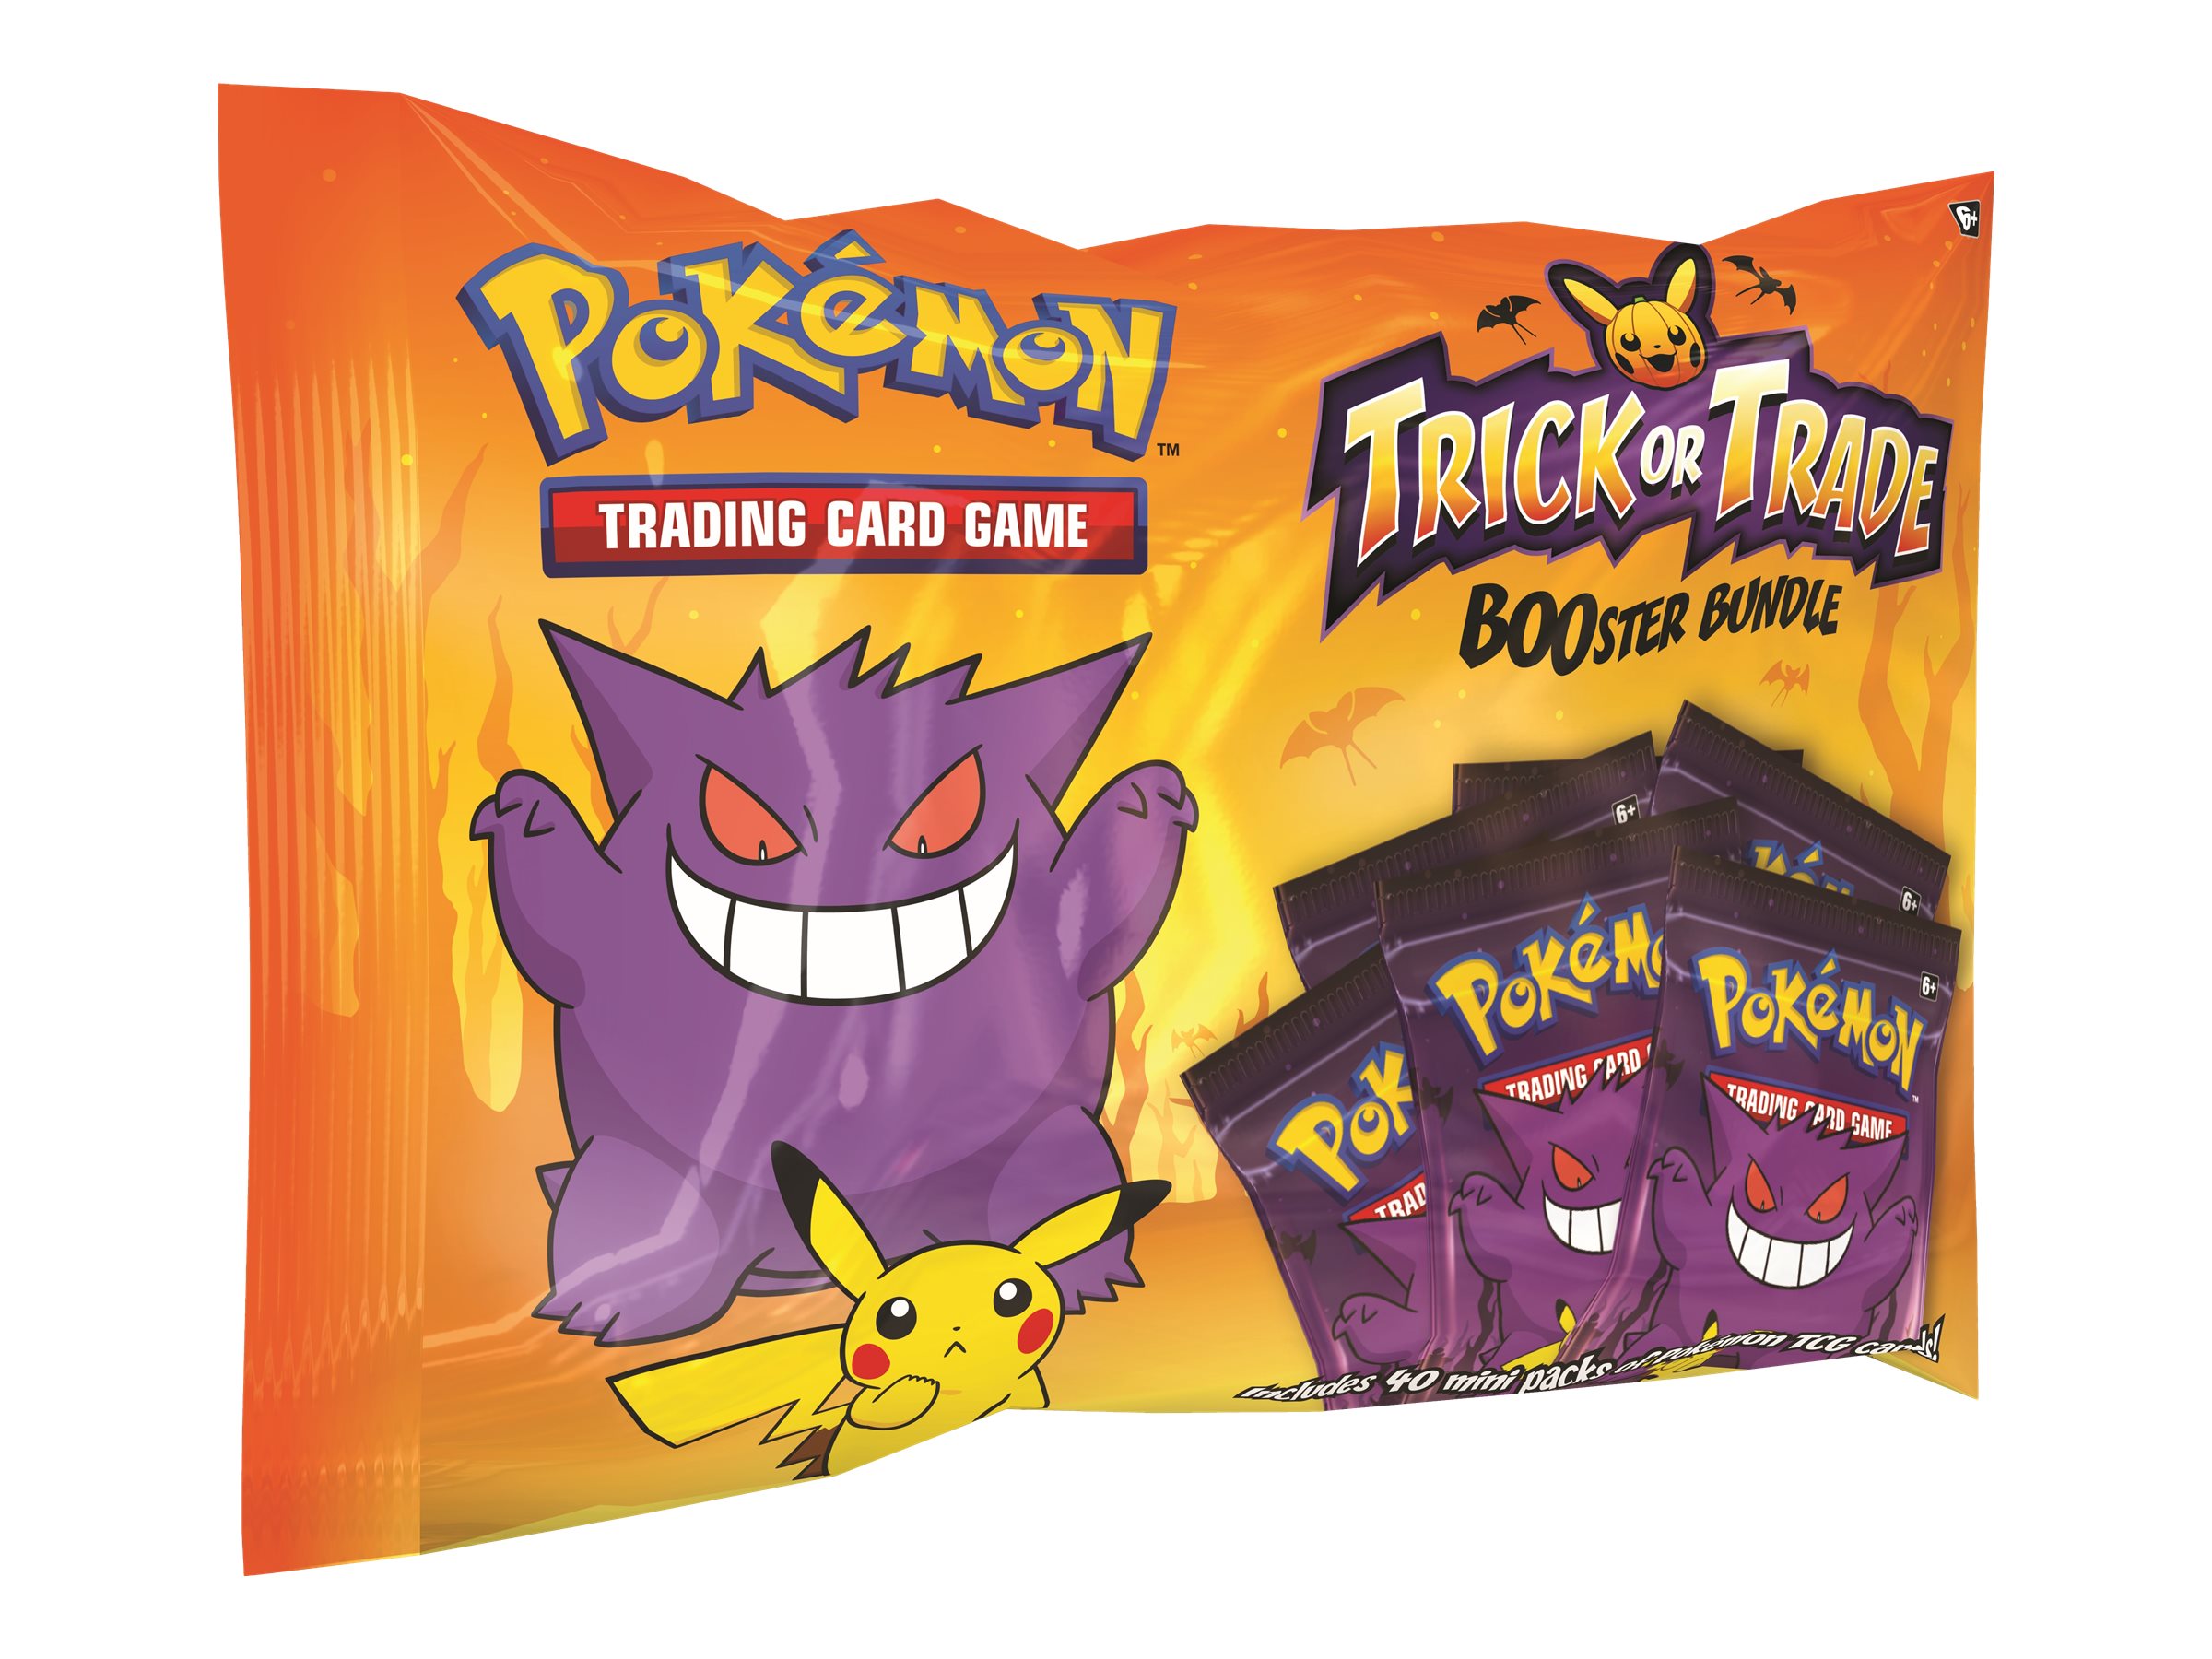 Pokemon TCG: Trick or Trade - Booster Pack